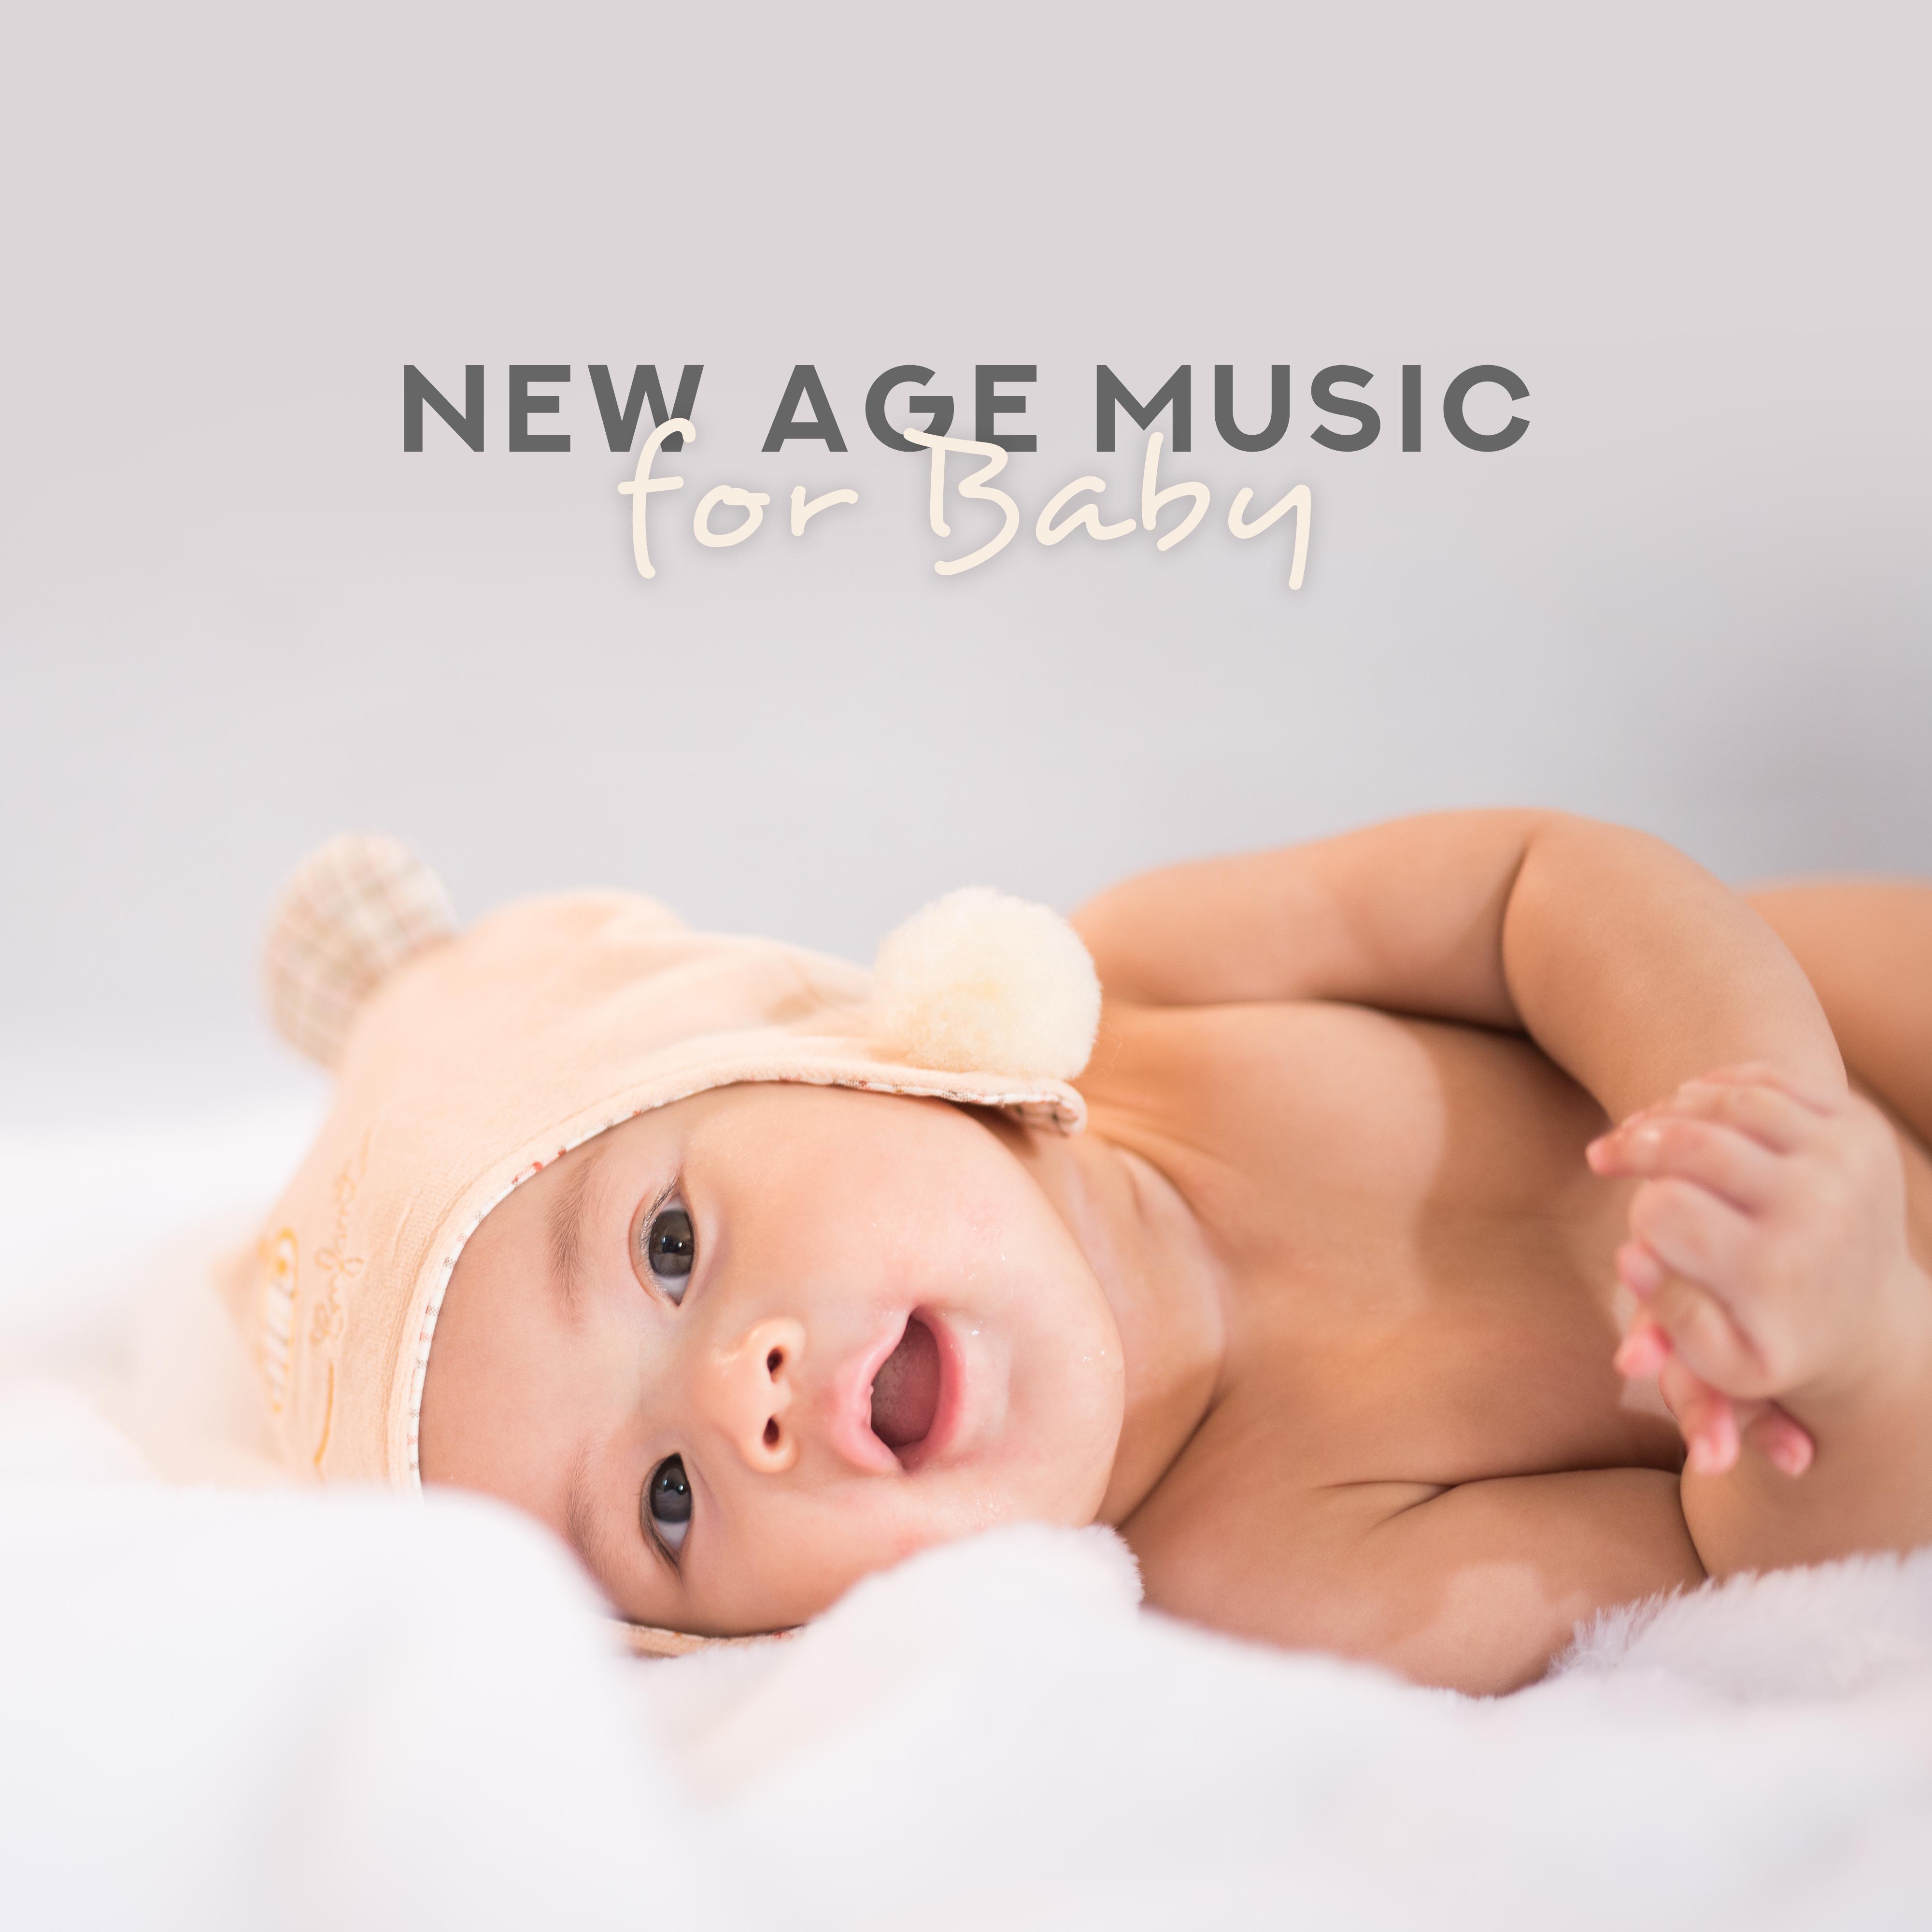 New Age Music for Baby  15 Calming Sounds for Sleep, Cradle Songs, Relaxed Baby, Sweet Lullabies, Relaxing Sounds for Kids